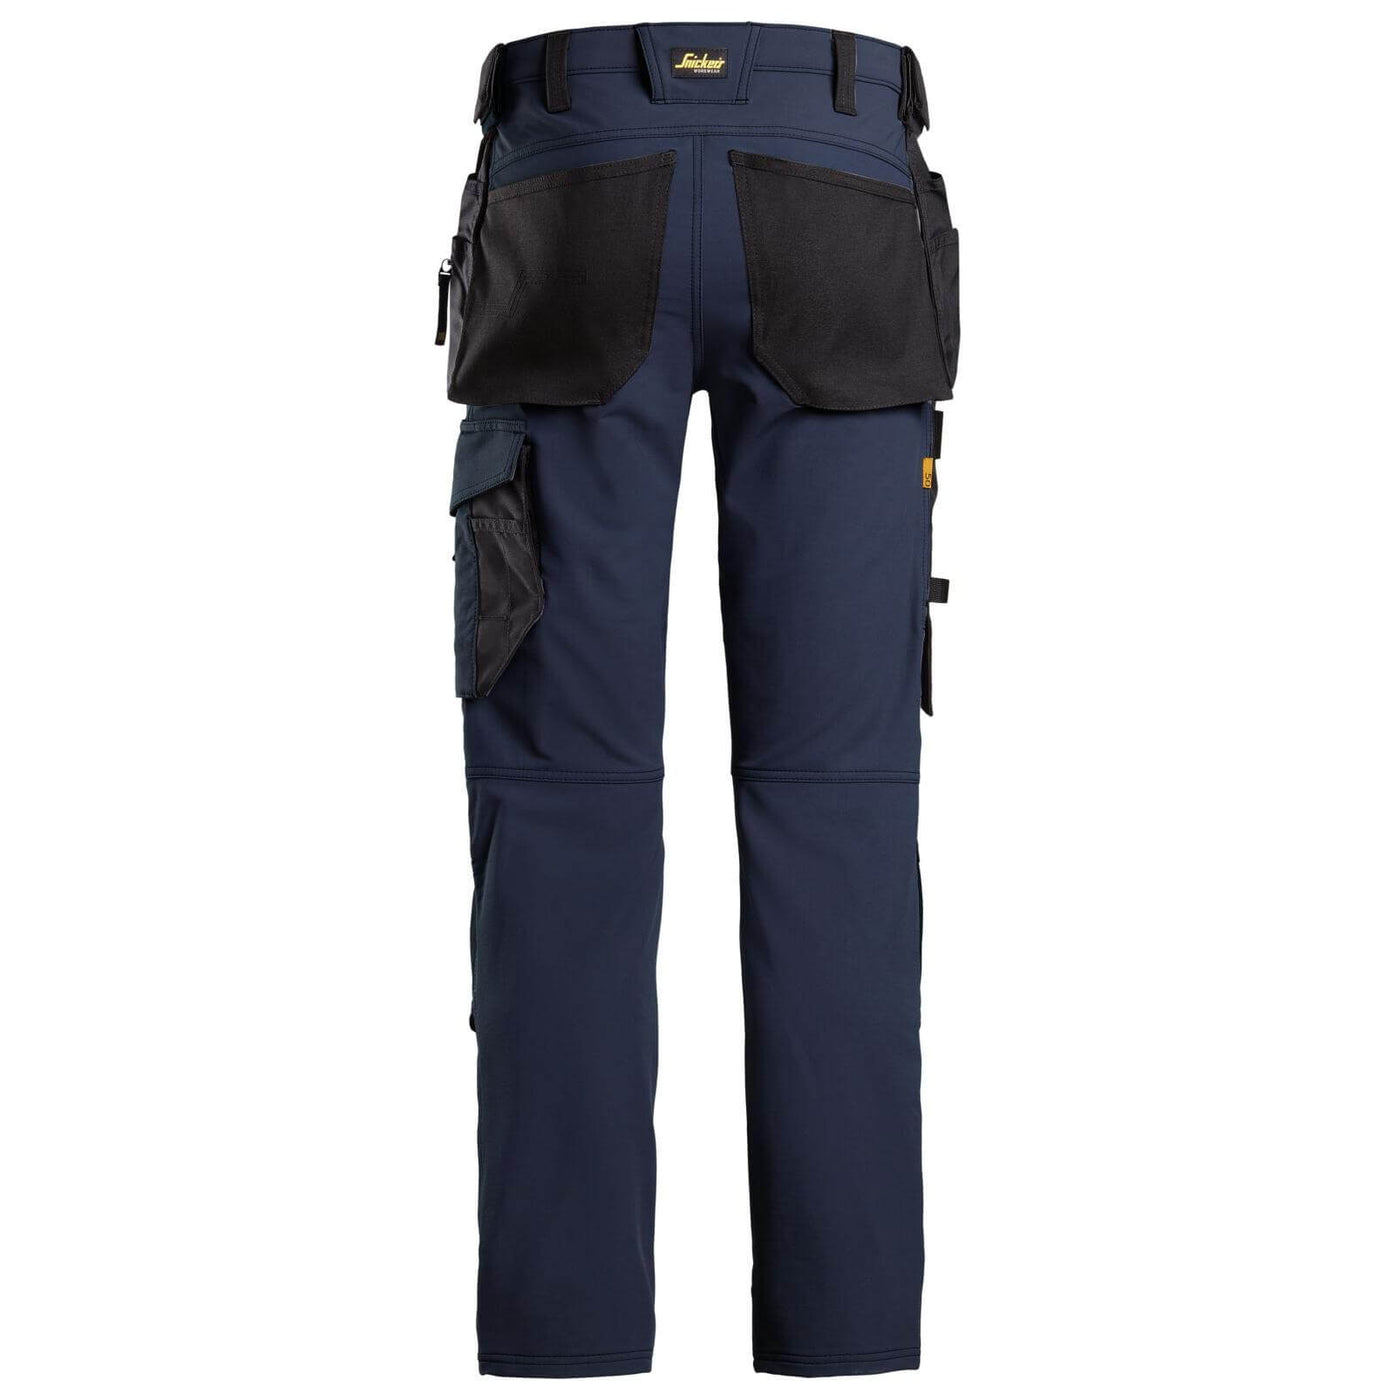 Snickers 6271 AllroundWork Full Stretch Slim Fit Trousers with Holster Pockets Navy Black back #colour_navy-black